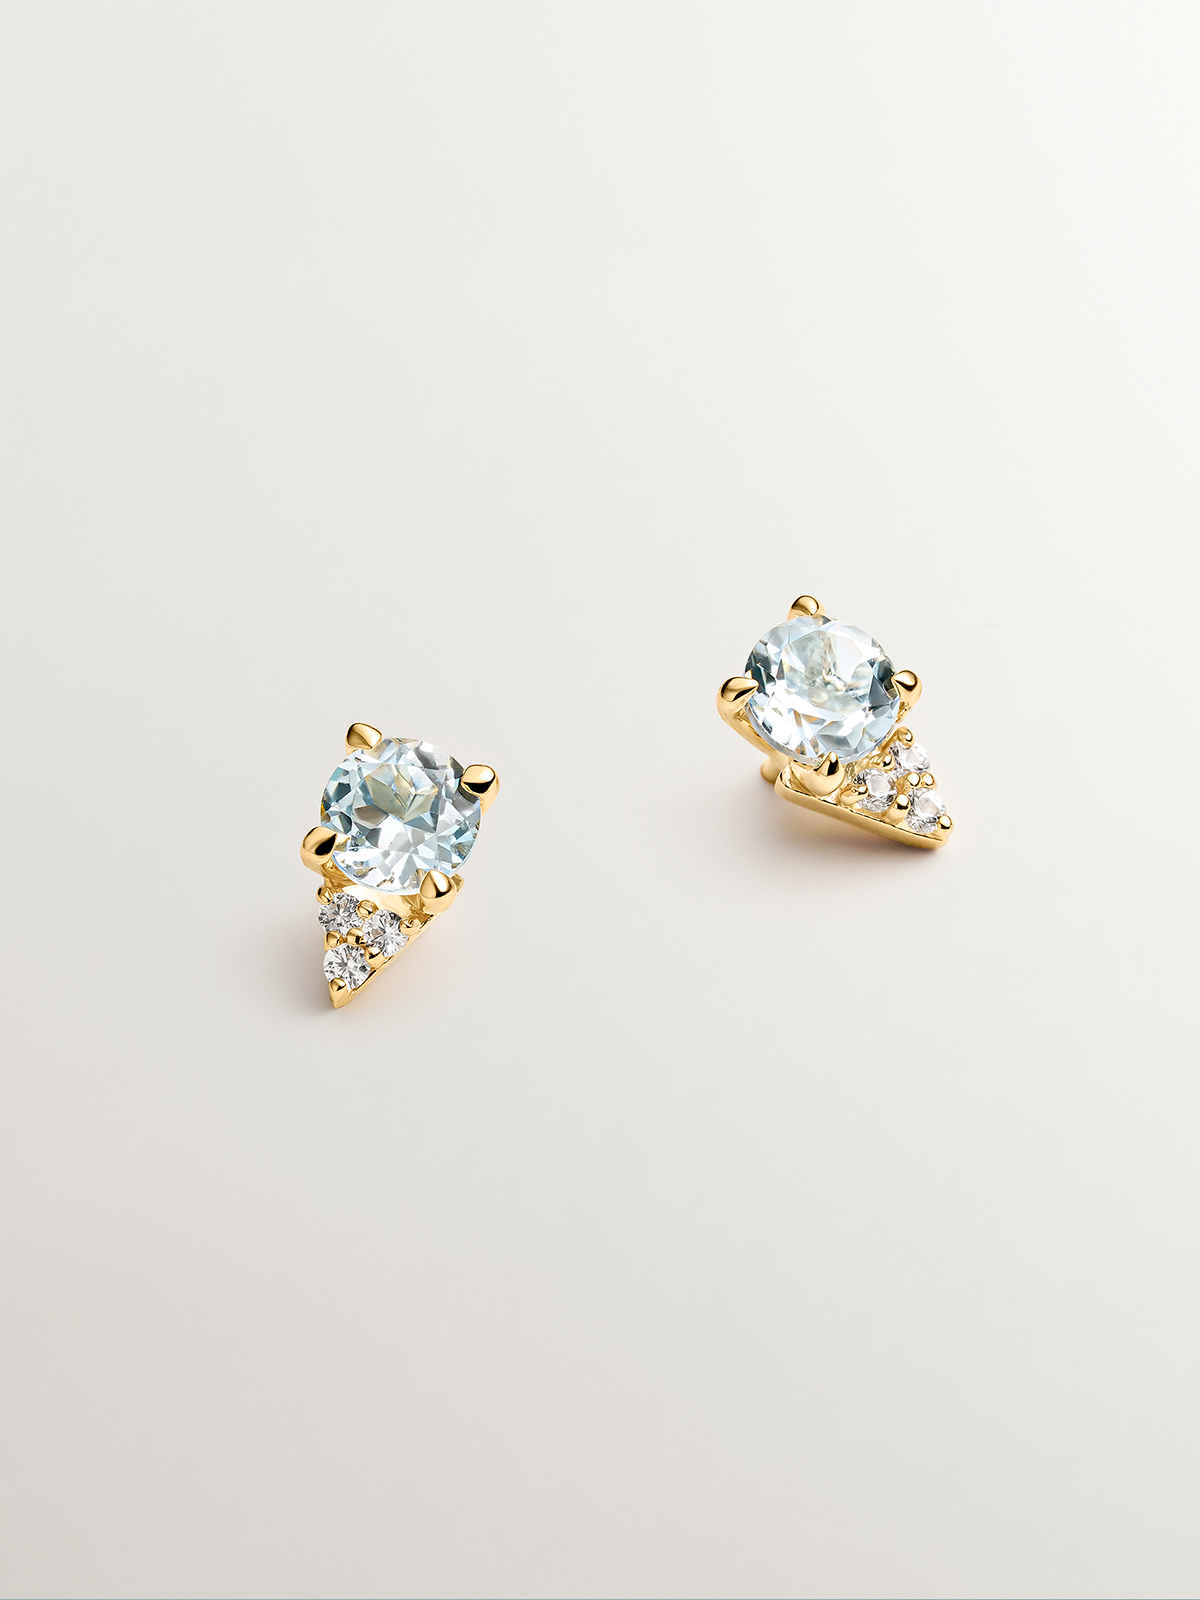 925 Silver earrings bathed in 18K yellow gold with sky blue topaz and white sapphires.